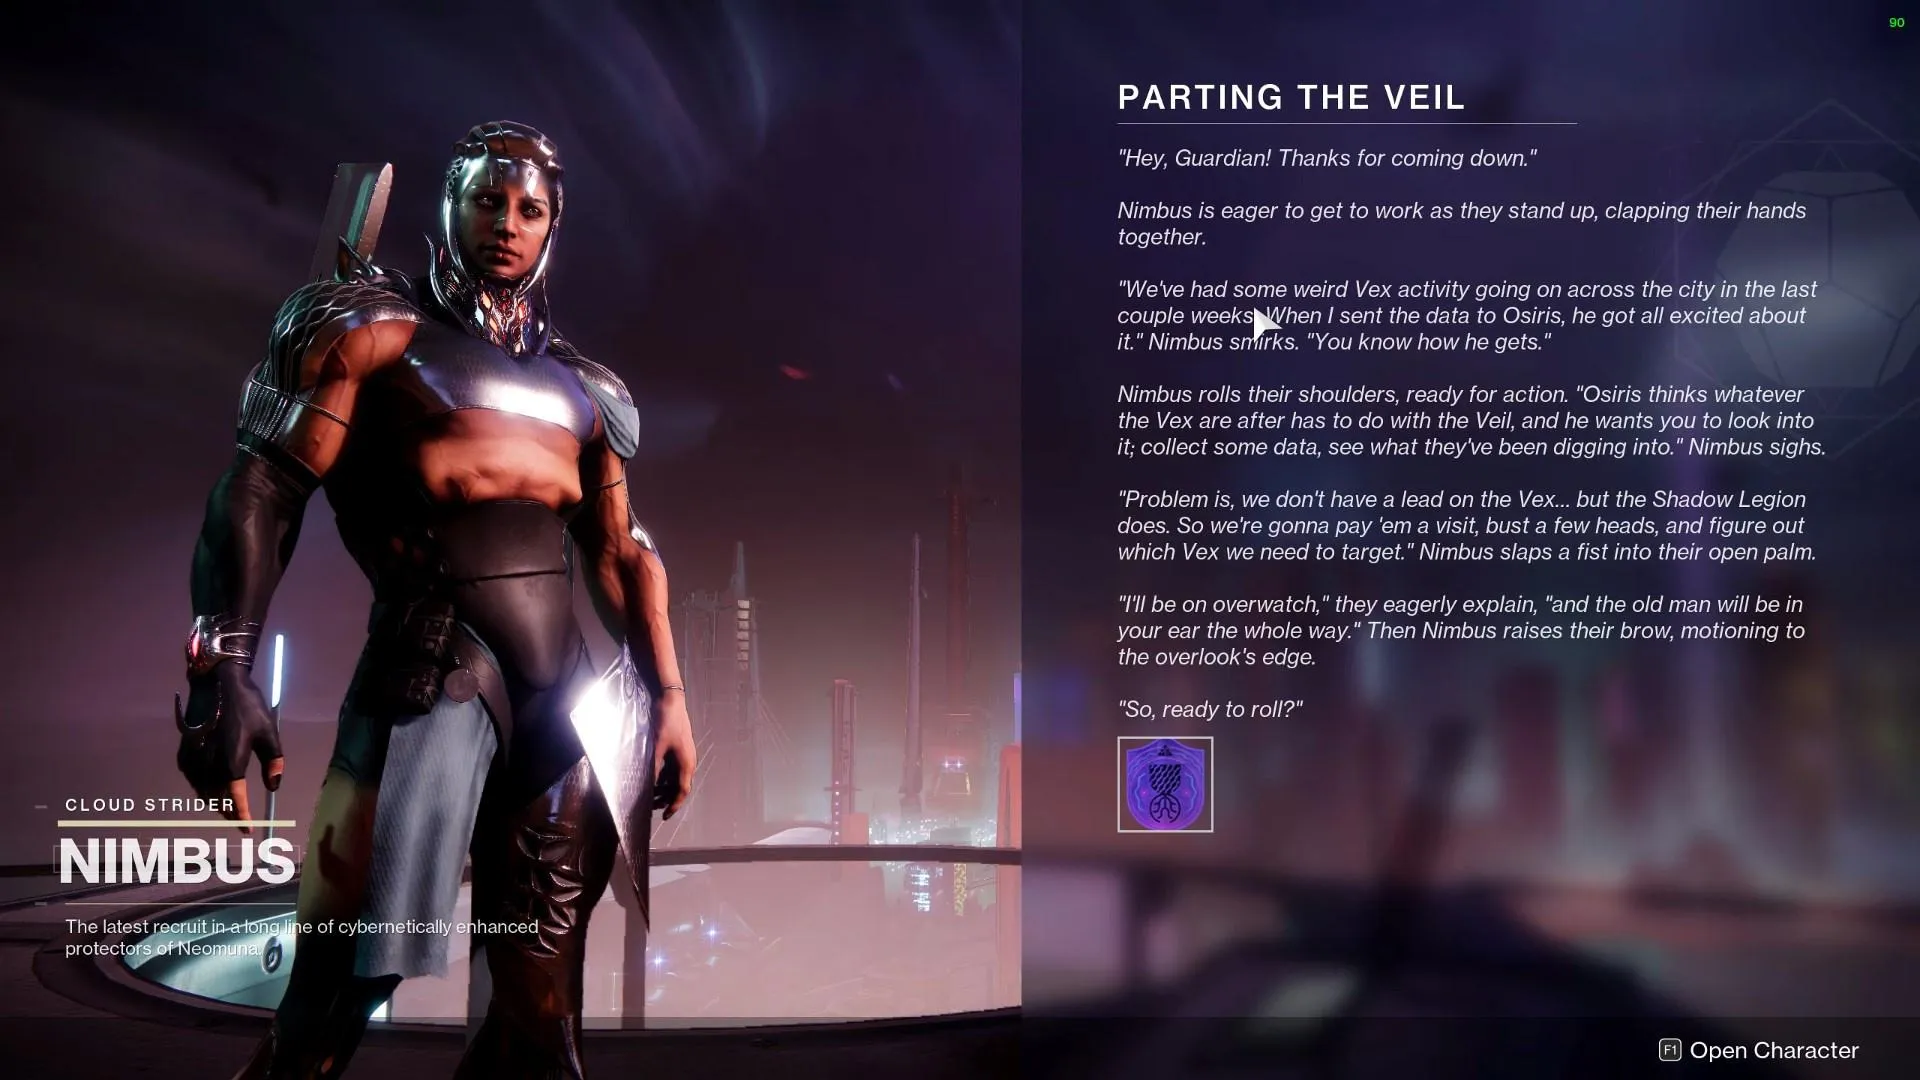 Destiny 2 Guide: How To Complete Parting The Veil Quest